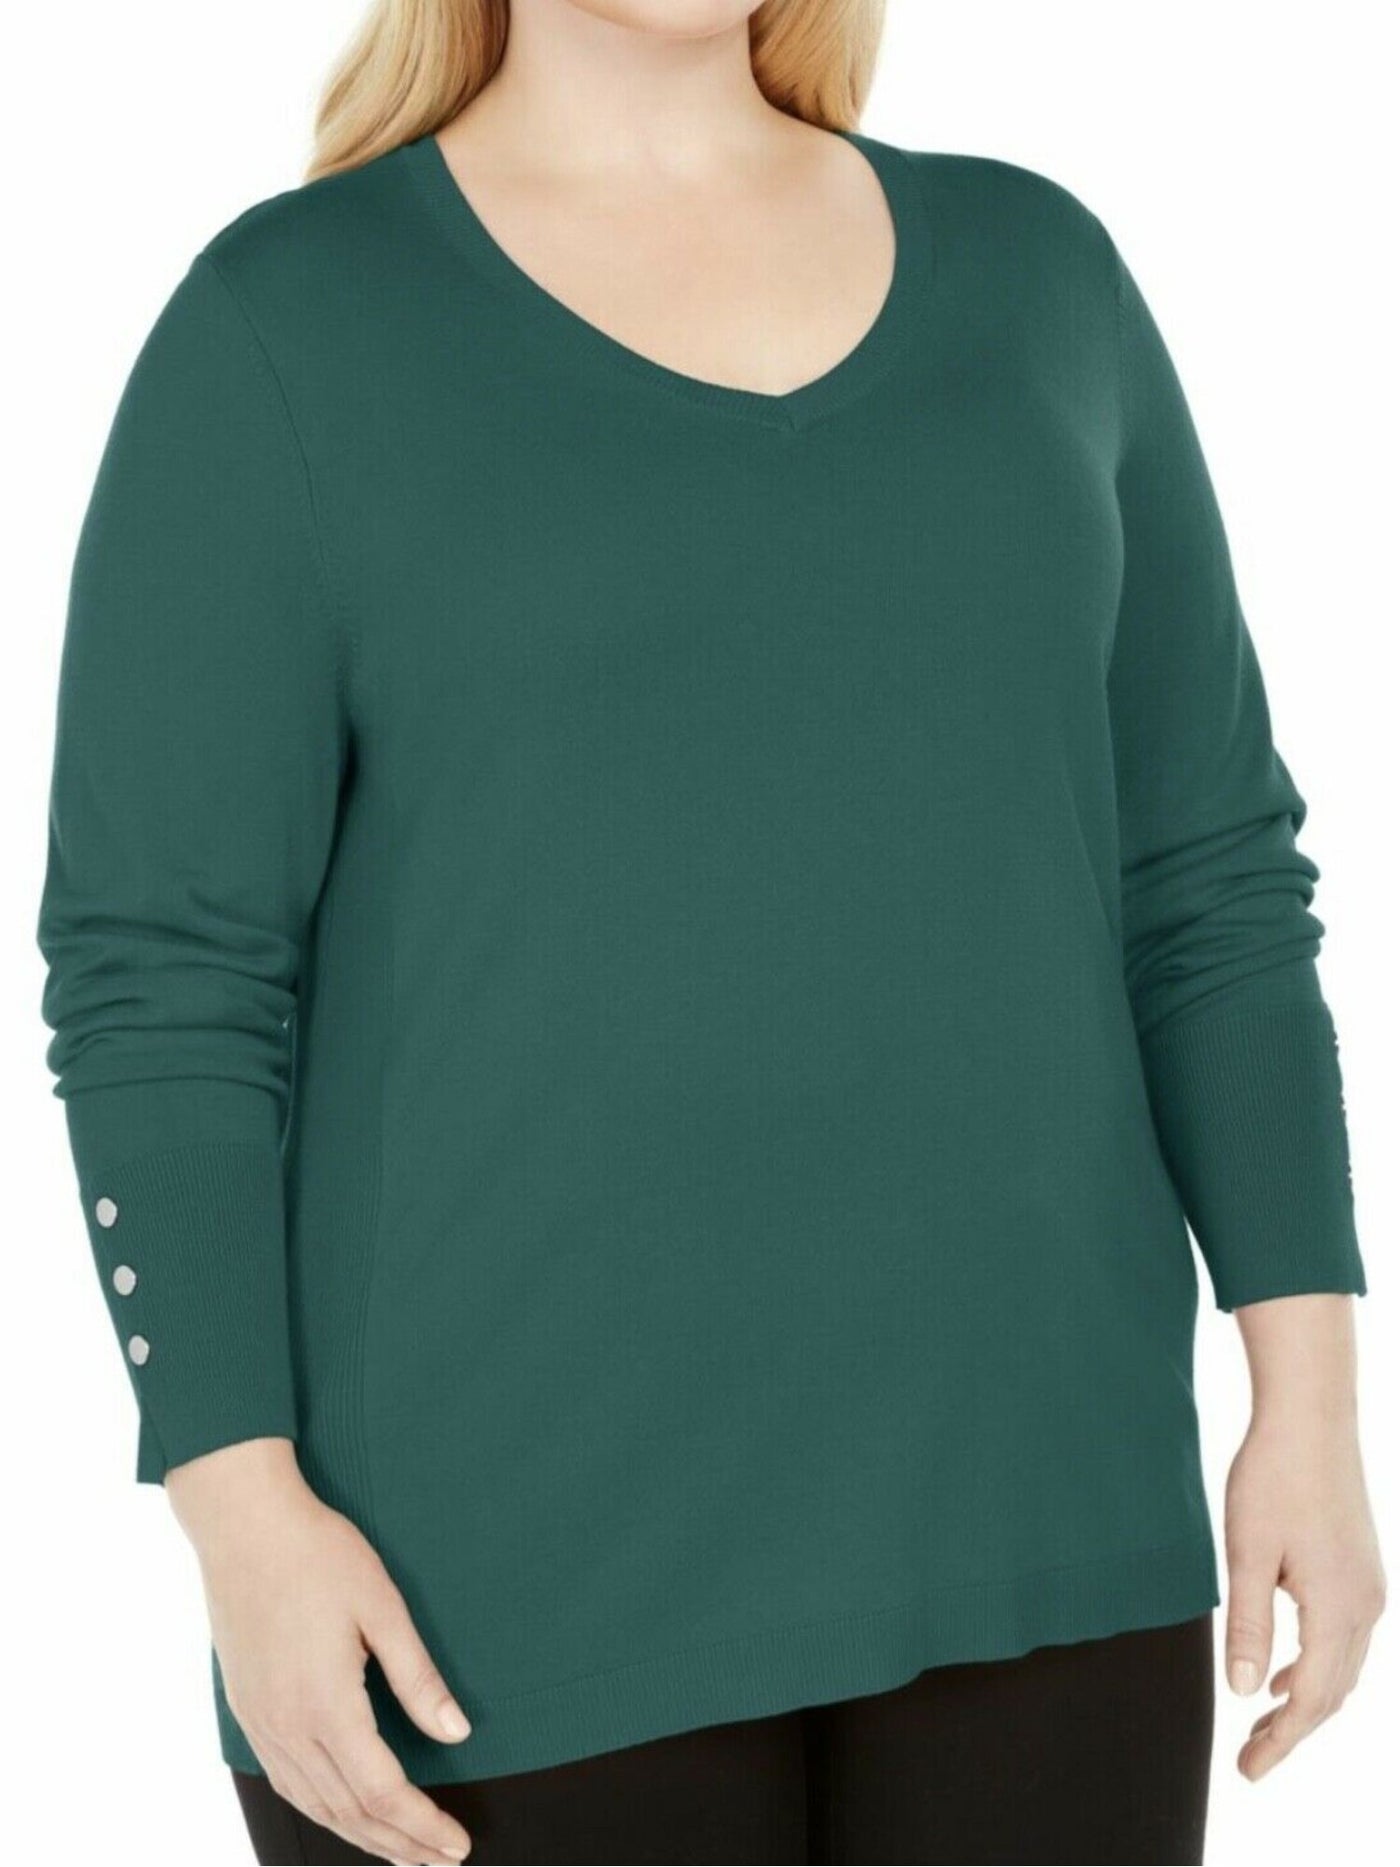 JM COLLECTION Womens Teal Long Sleeve V Neck Sweater L